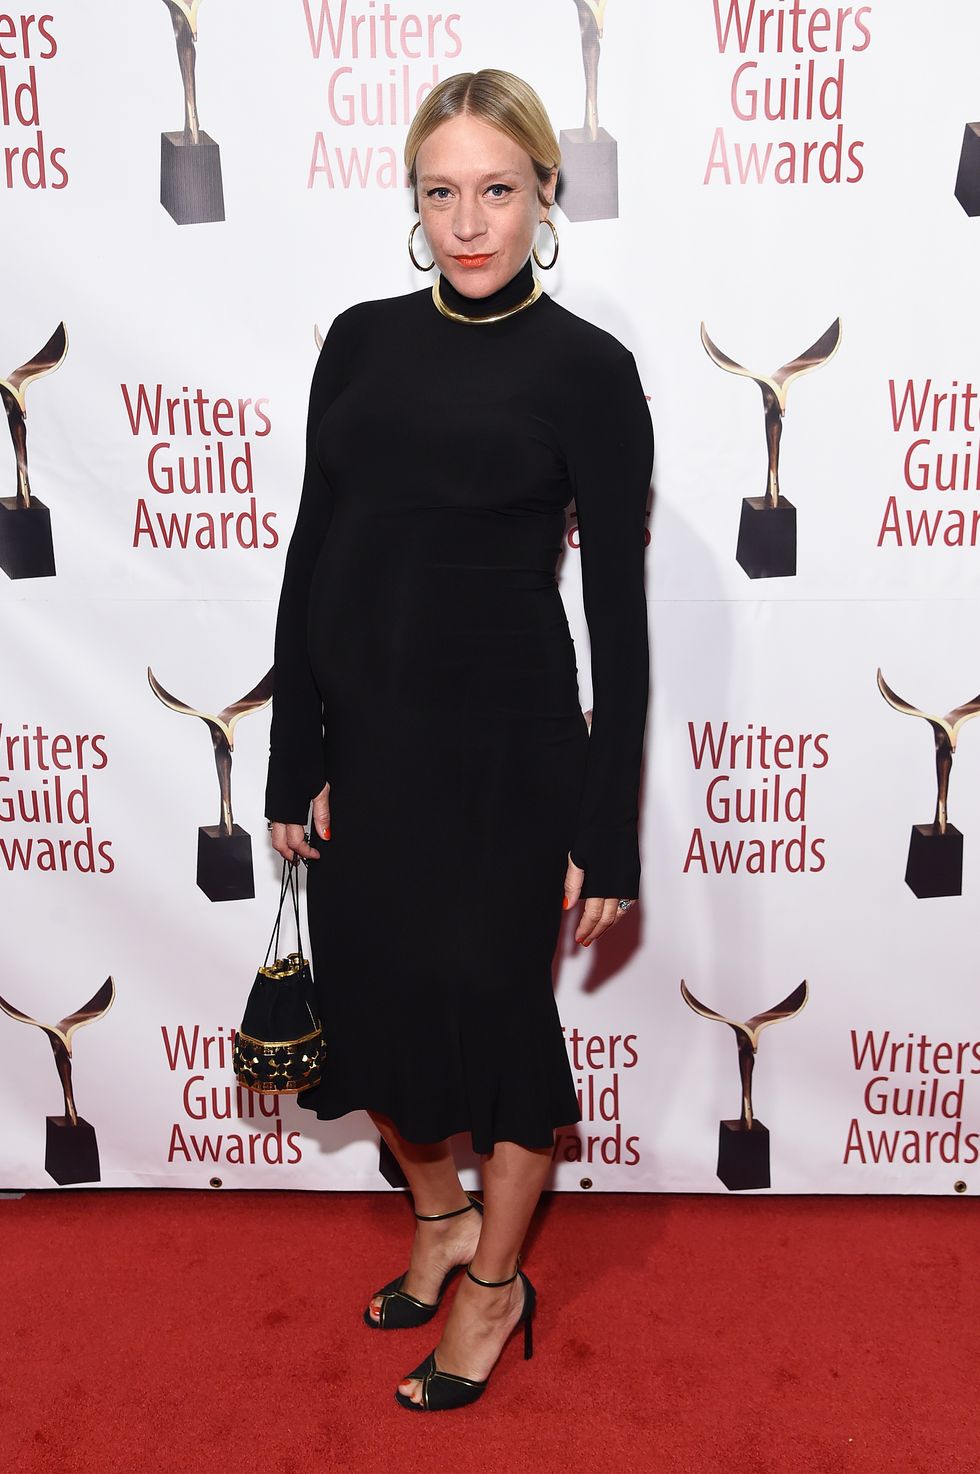 72nd Writers Guild Awards - New York Ceremony - Arrivals